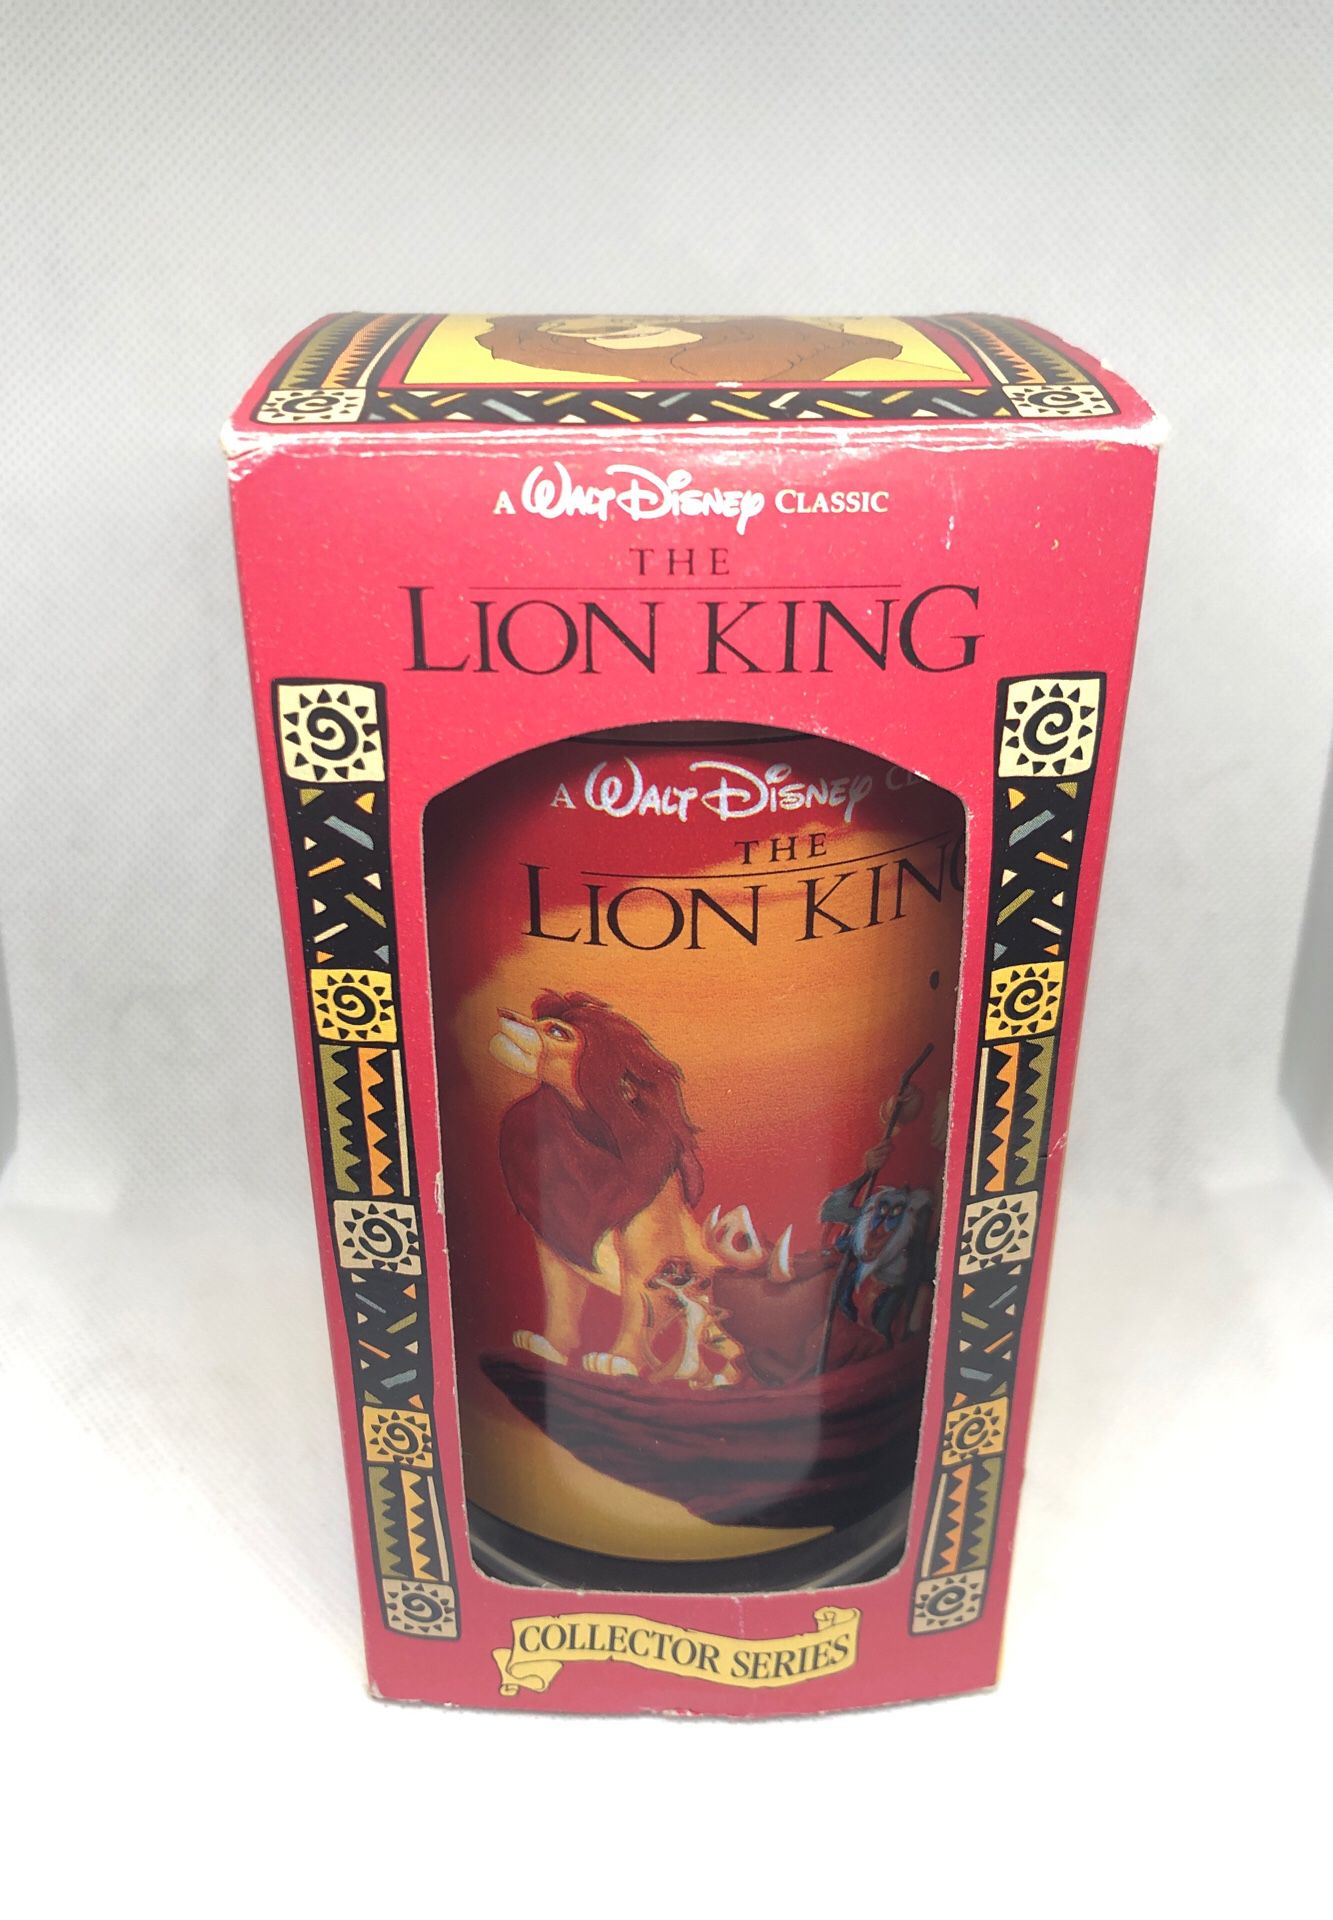 Disney’s The Lion King Burger King Coca-Cola Collector Series Glasses